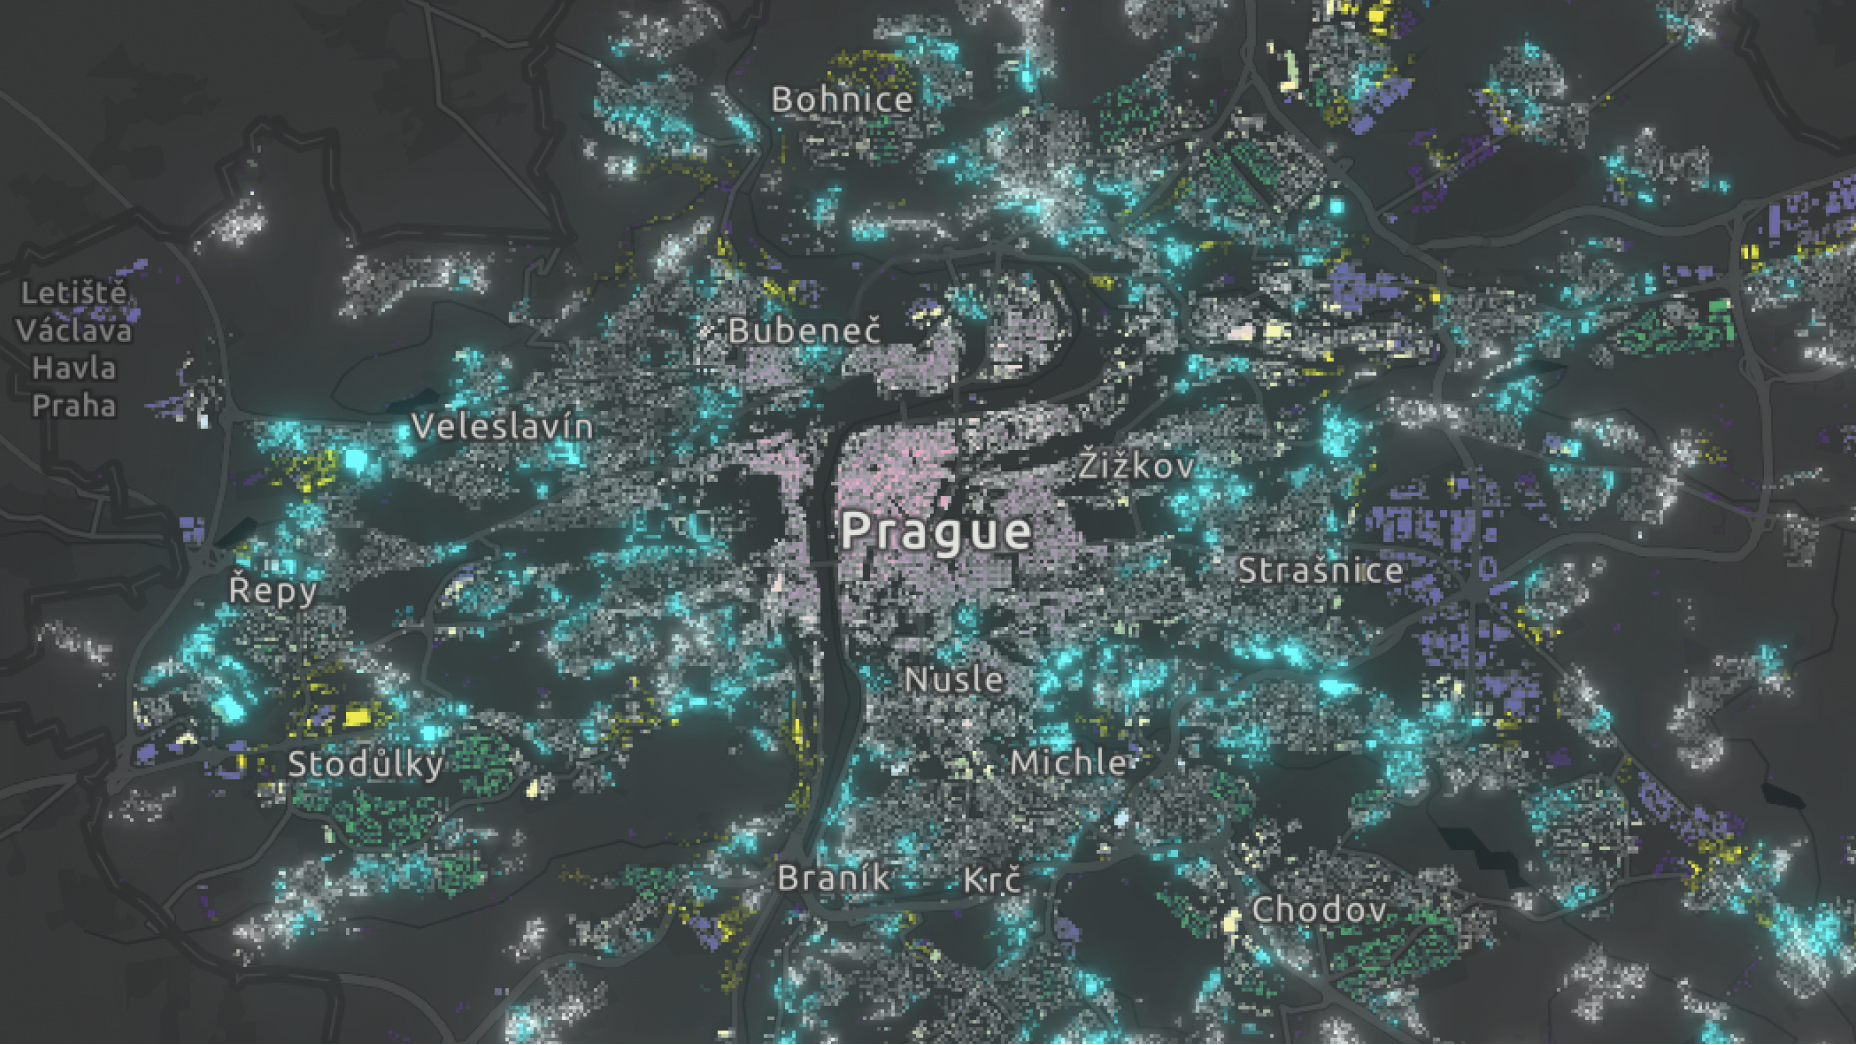 A dark themed map of Prague with neon dots illustrating urban diversity